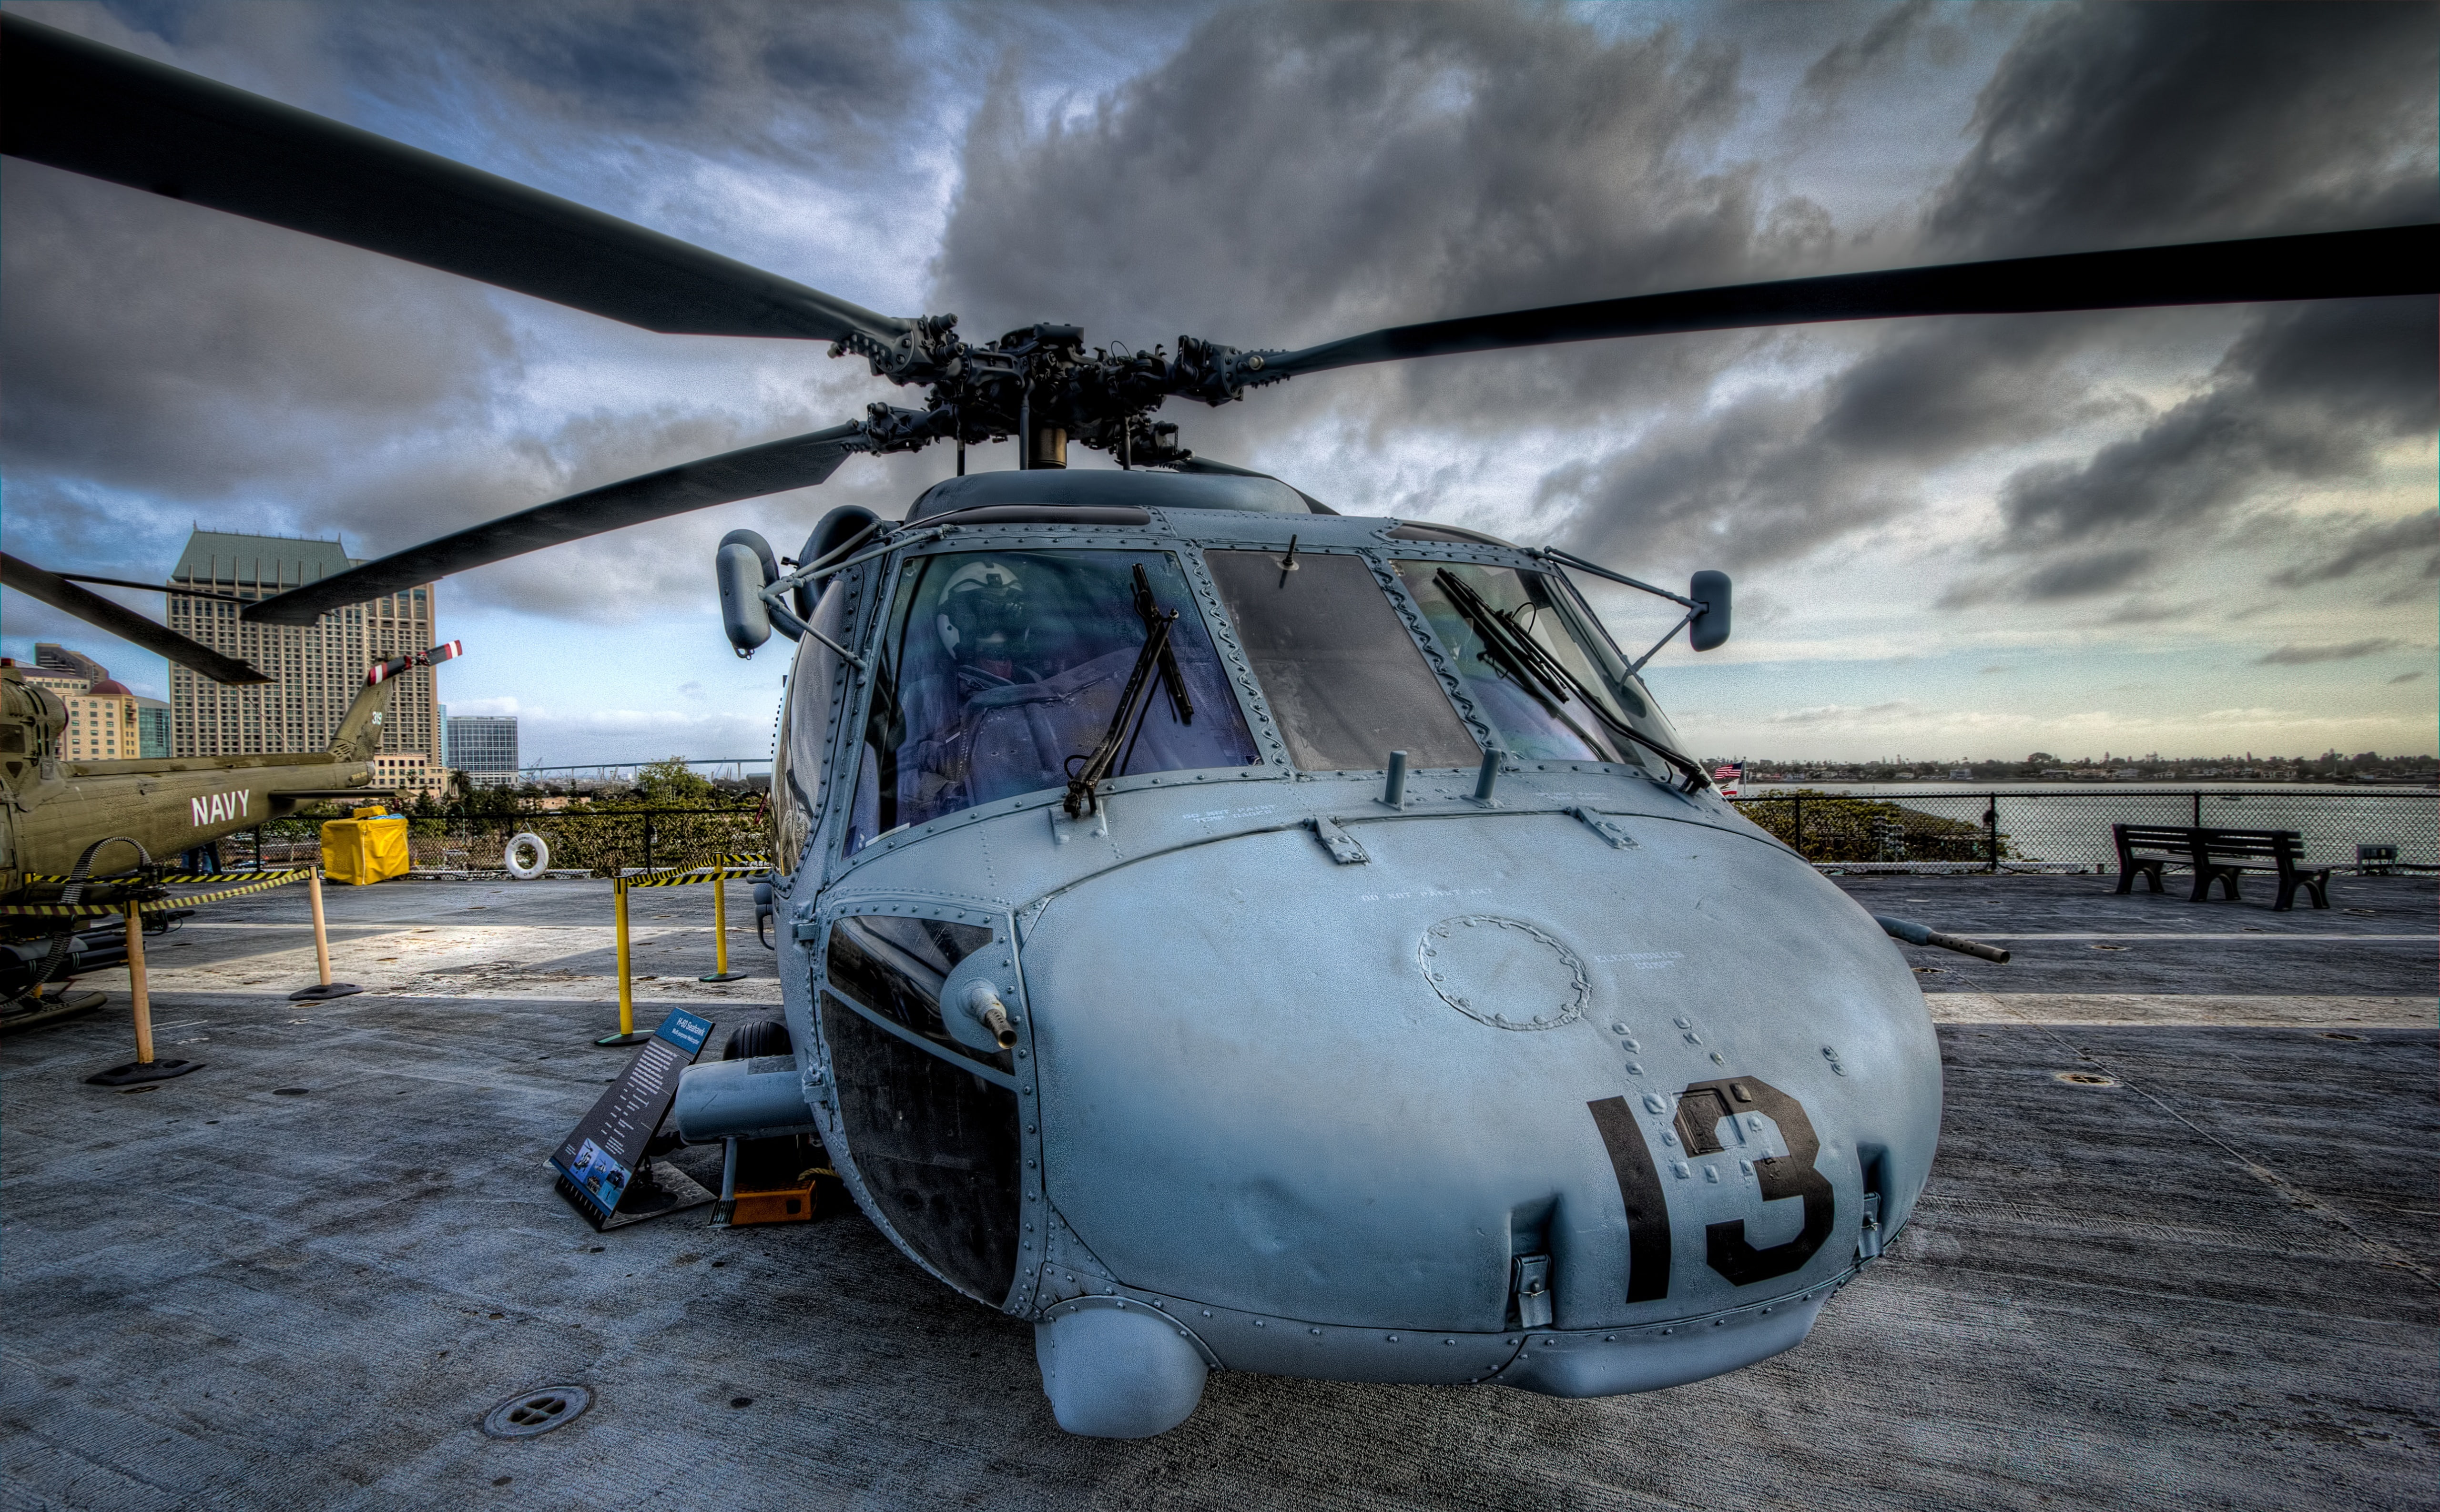 H-60 Seahawk, gray helicopter, Army, Pacific, Ocean, Aircraft